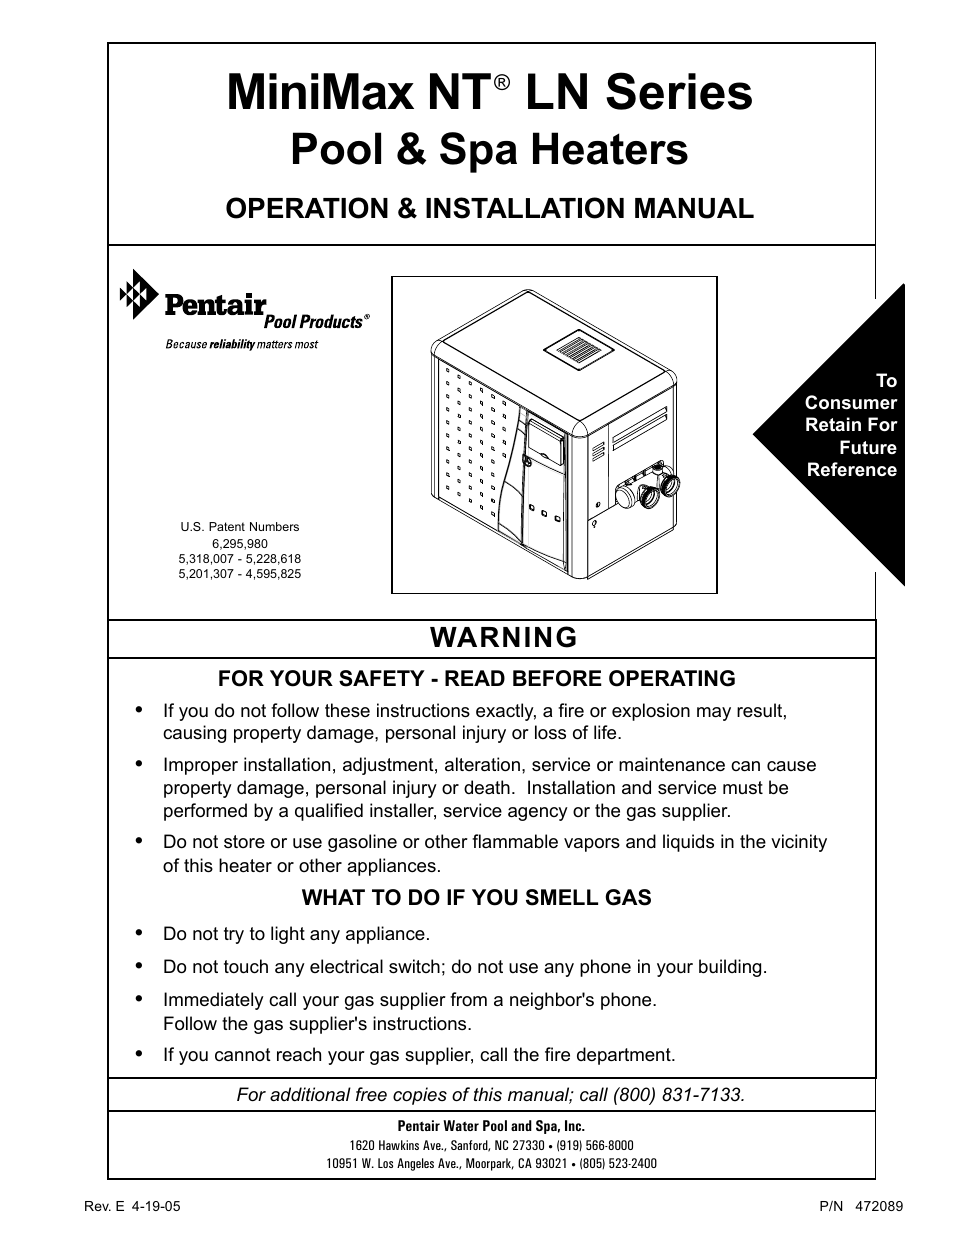 Pentair MiniMax NT LN User Manual | 36 pages